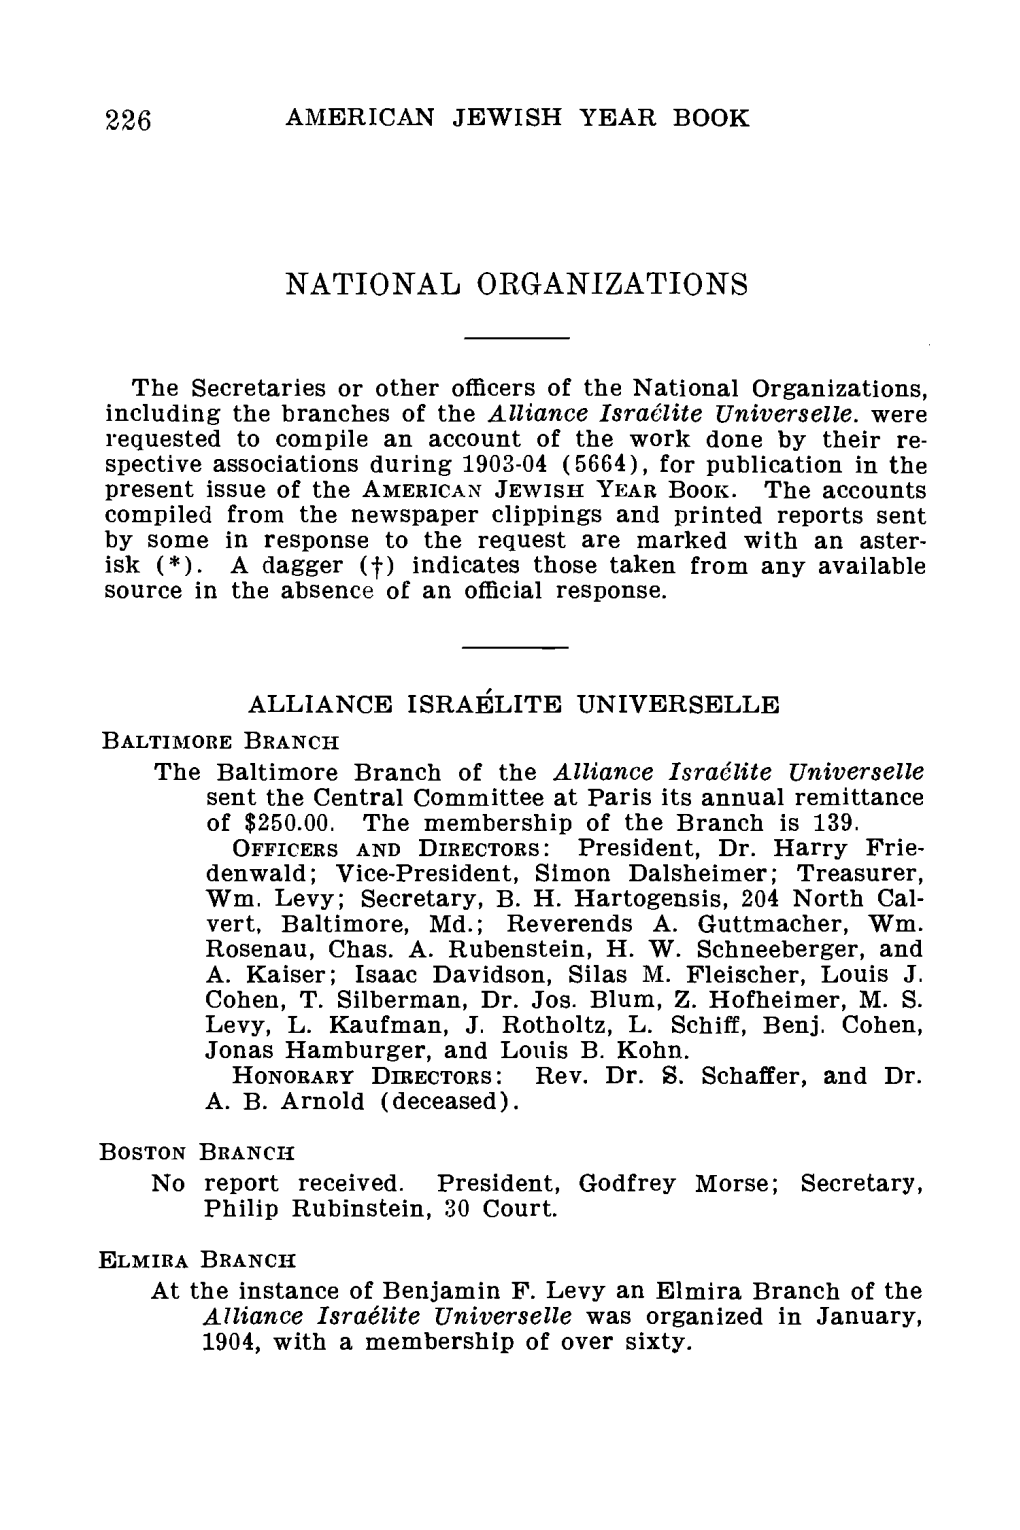 Directory of National Organizations (1904-1905)